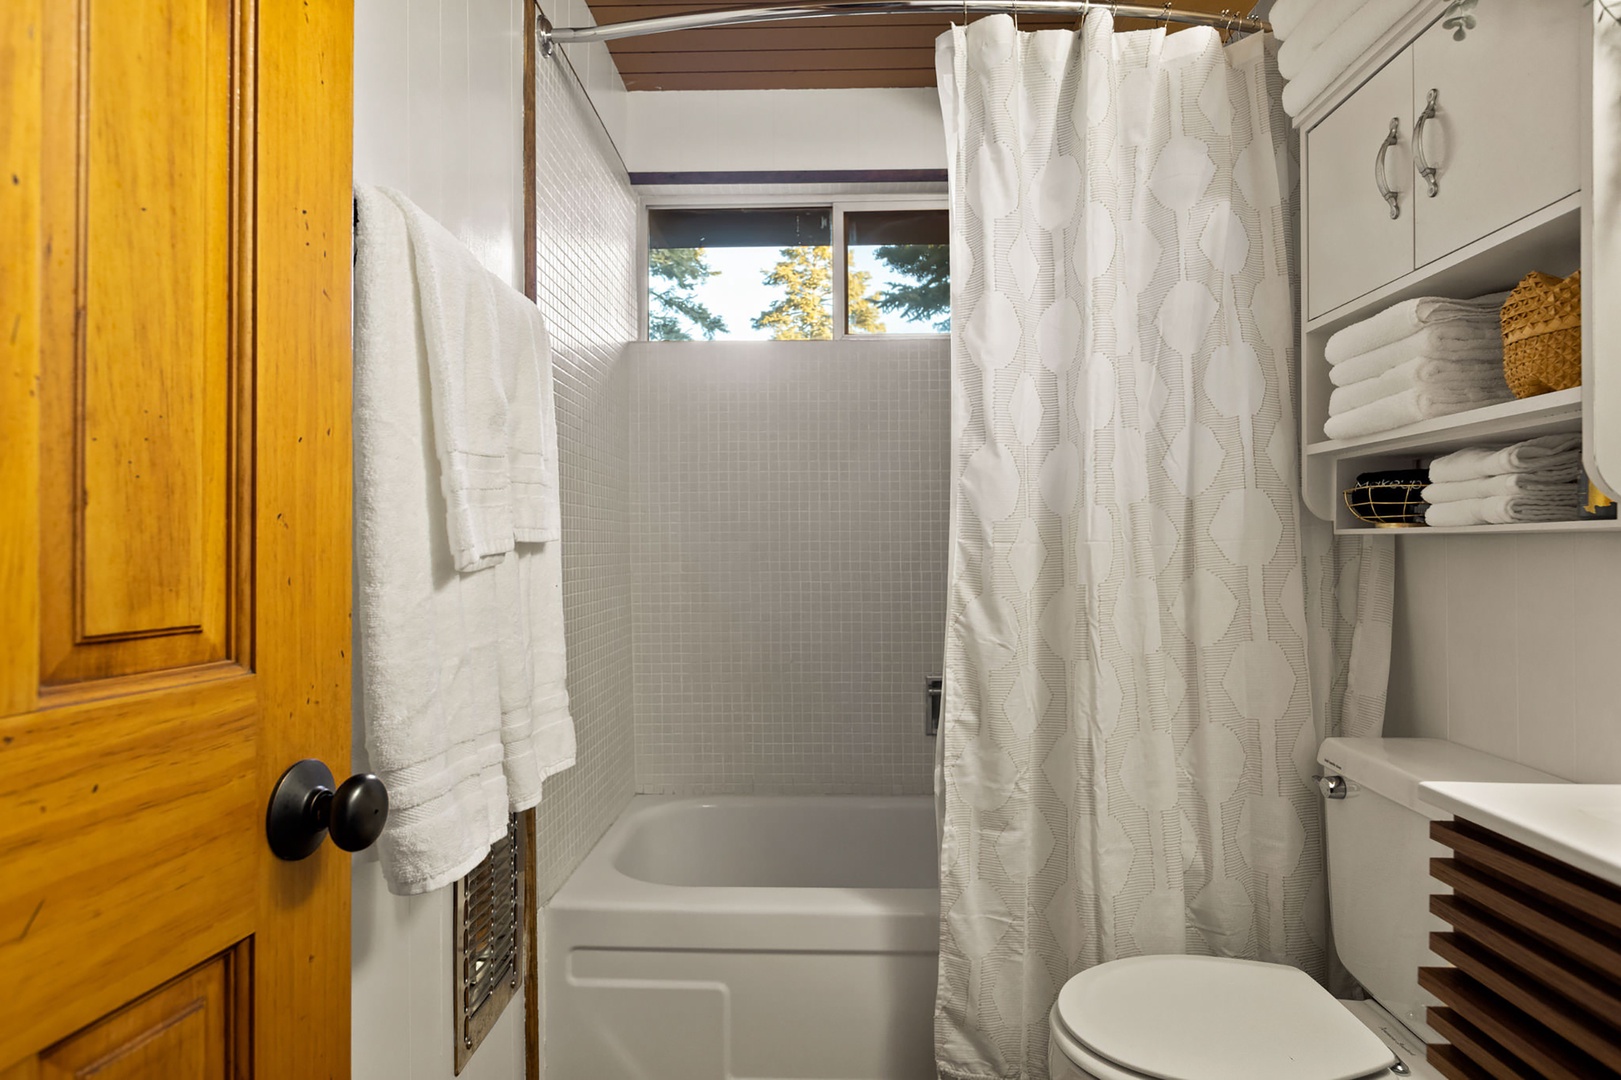 The full bath on the main level includes a single sink & shower/tub combo